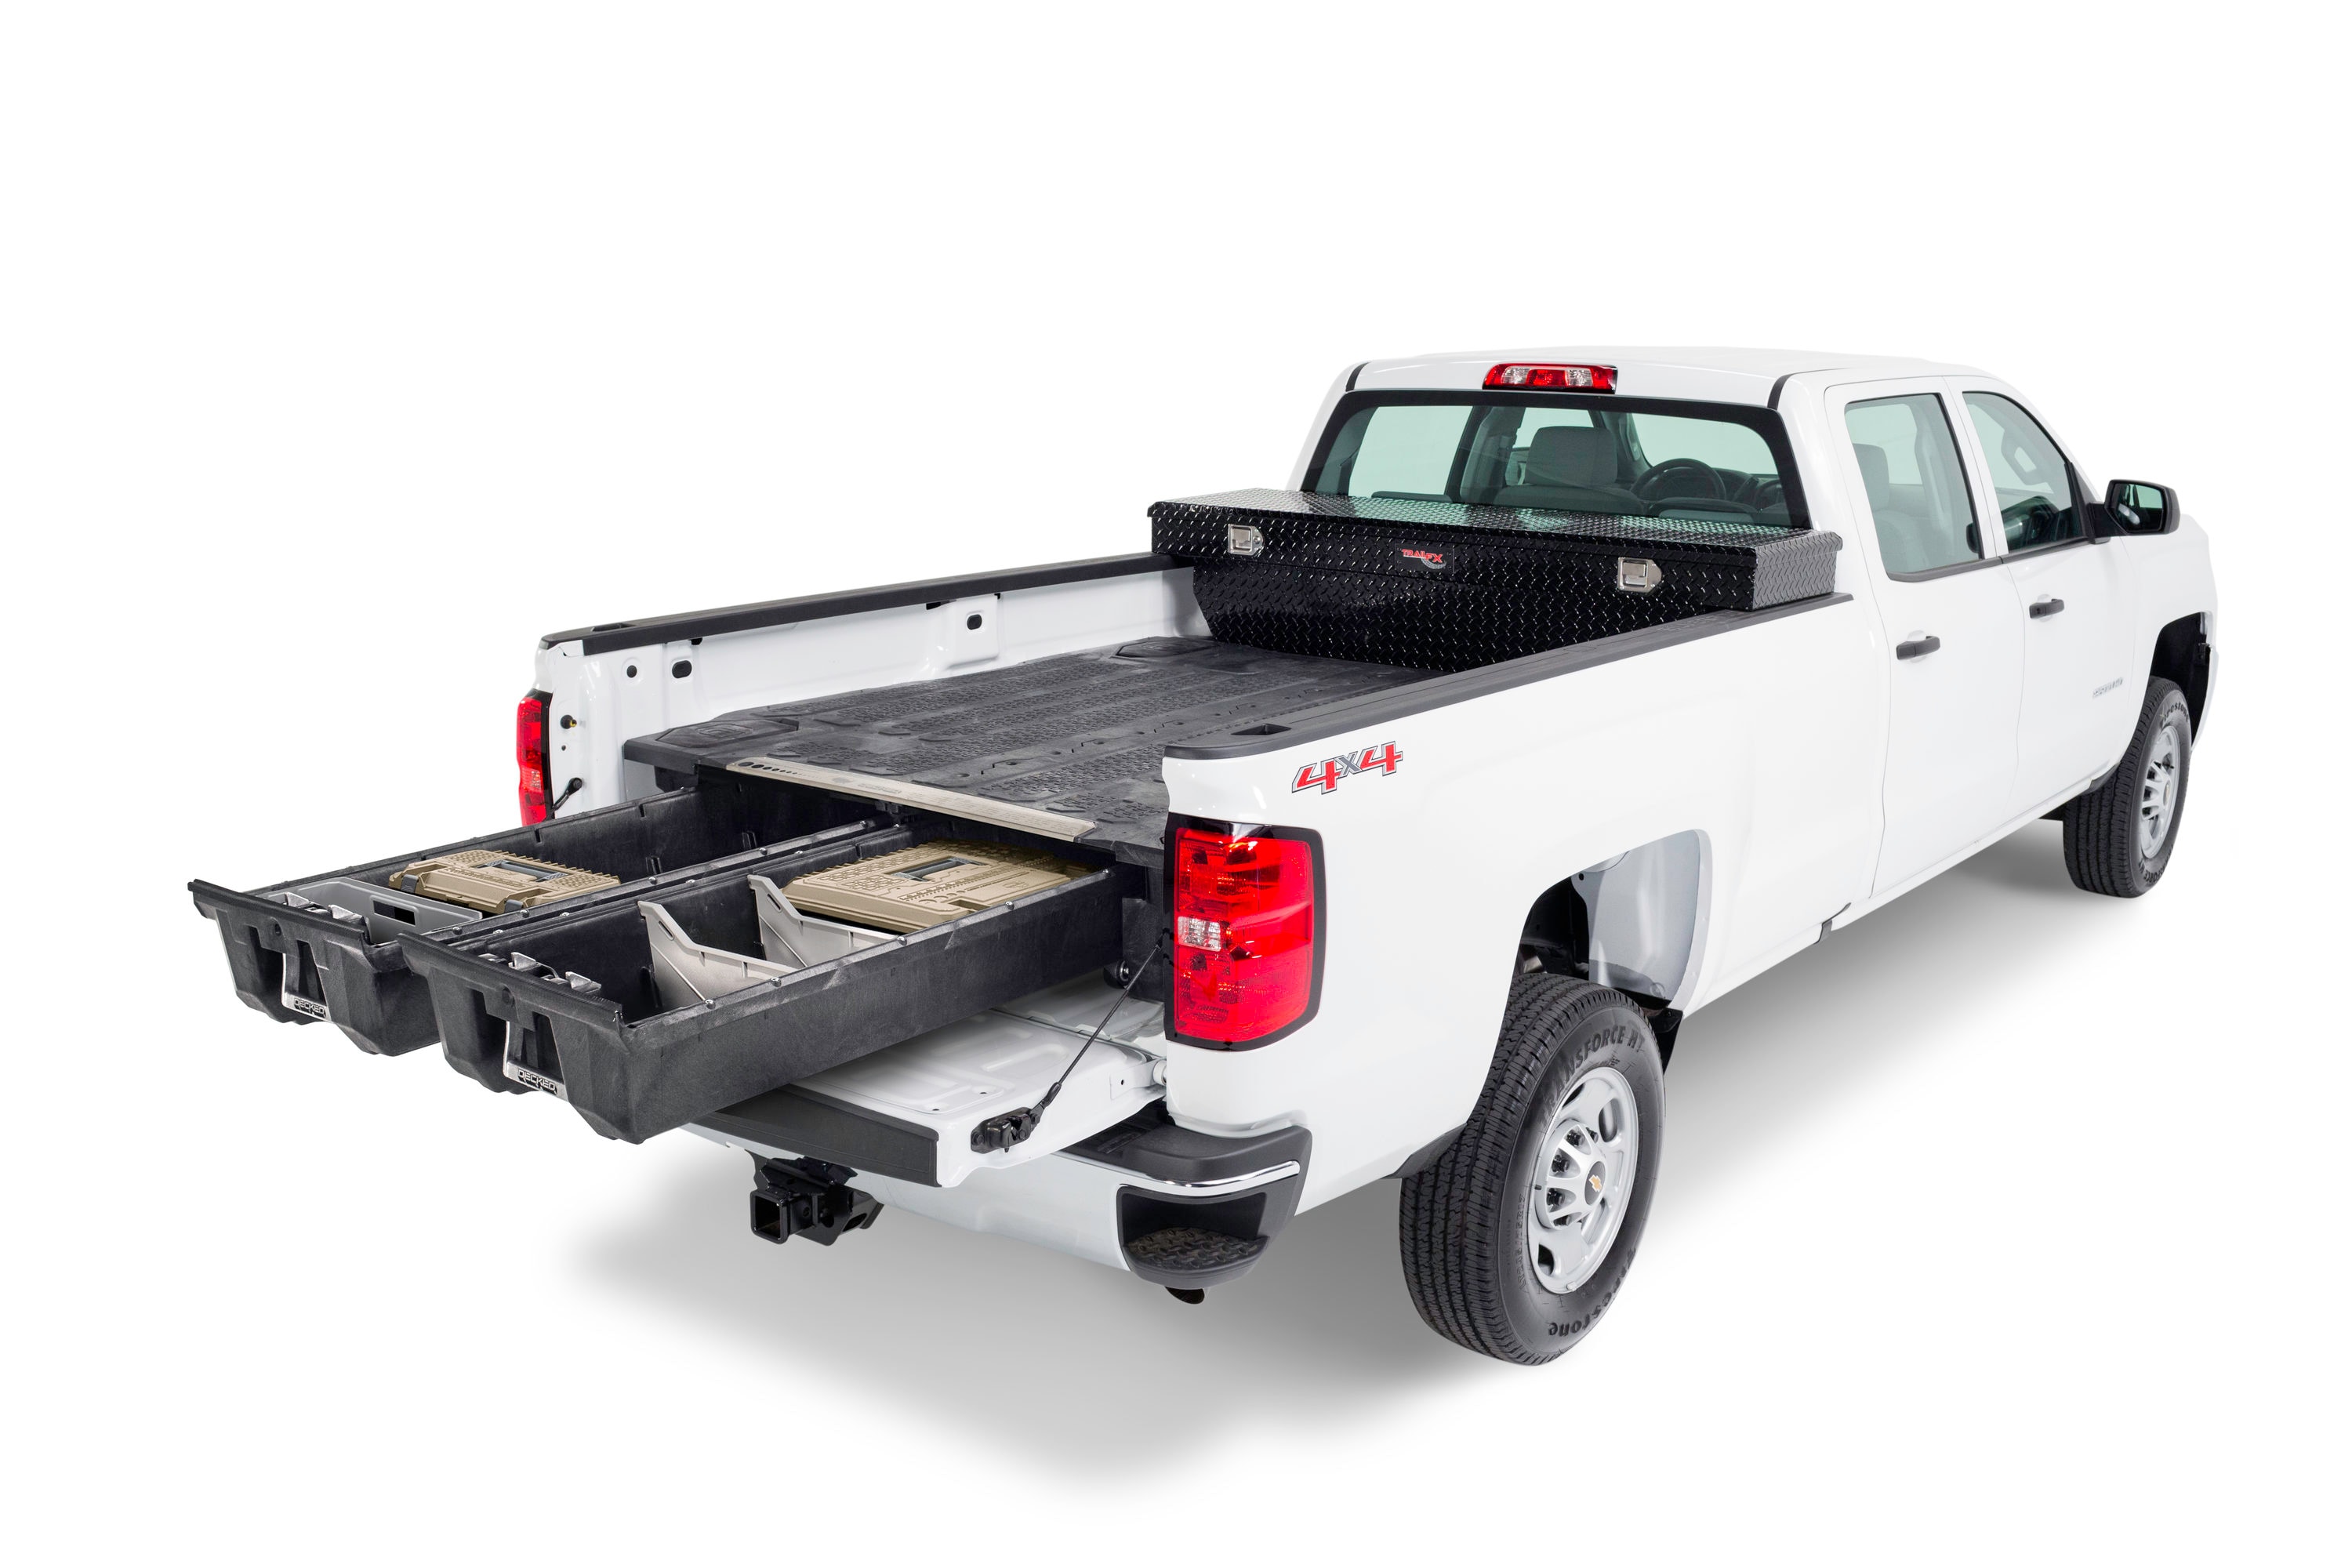 DECKED DECKED Storage System for RAM 1500 8-ft Bed Length (2002-2018) Classic (2019) 2500 and 3500 (2003-2019)- 75.25-in System Length in Black | DR5